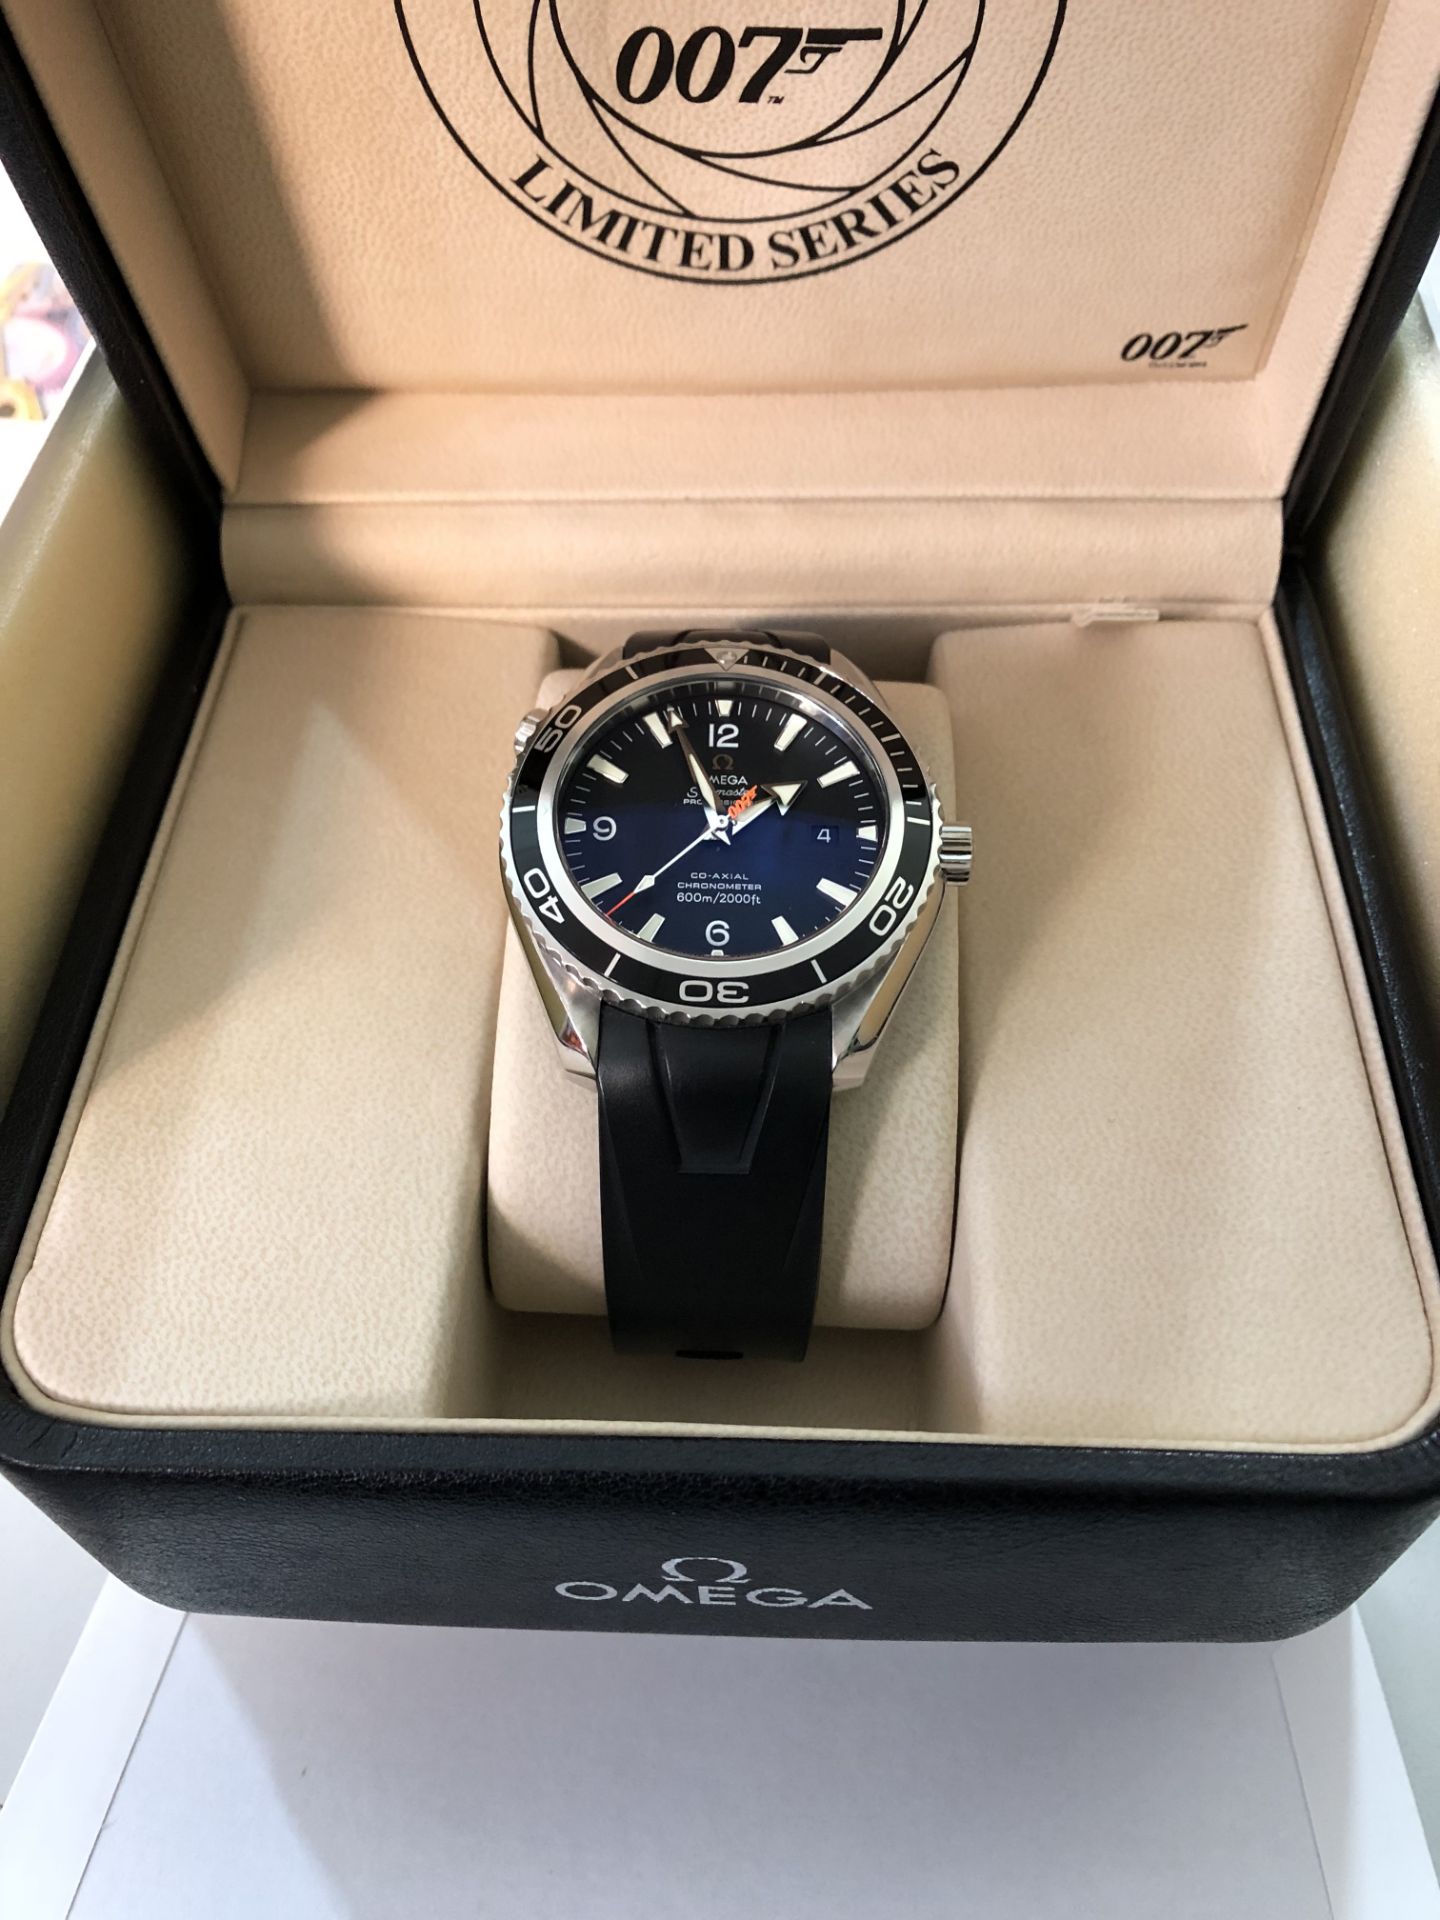 RARE OMEGA JAMES BOND 007 SEAMASTER WATCH NUMBER 0140 OUT OF 5007 - Image 3 of 10